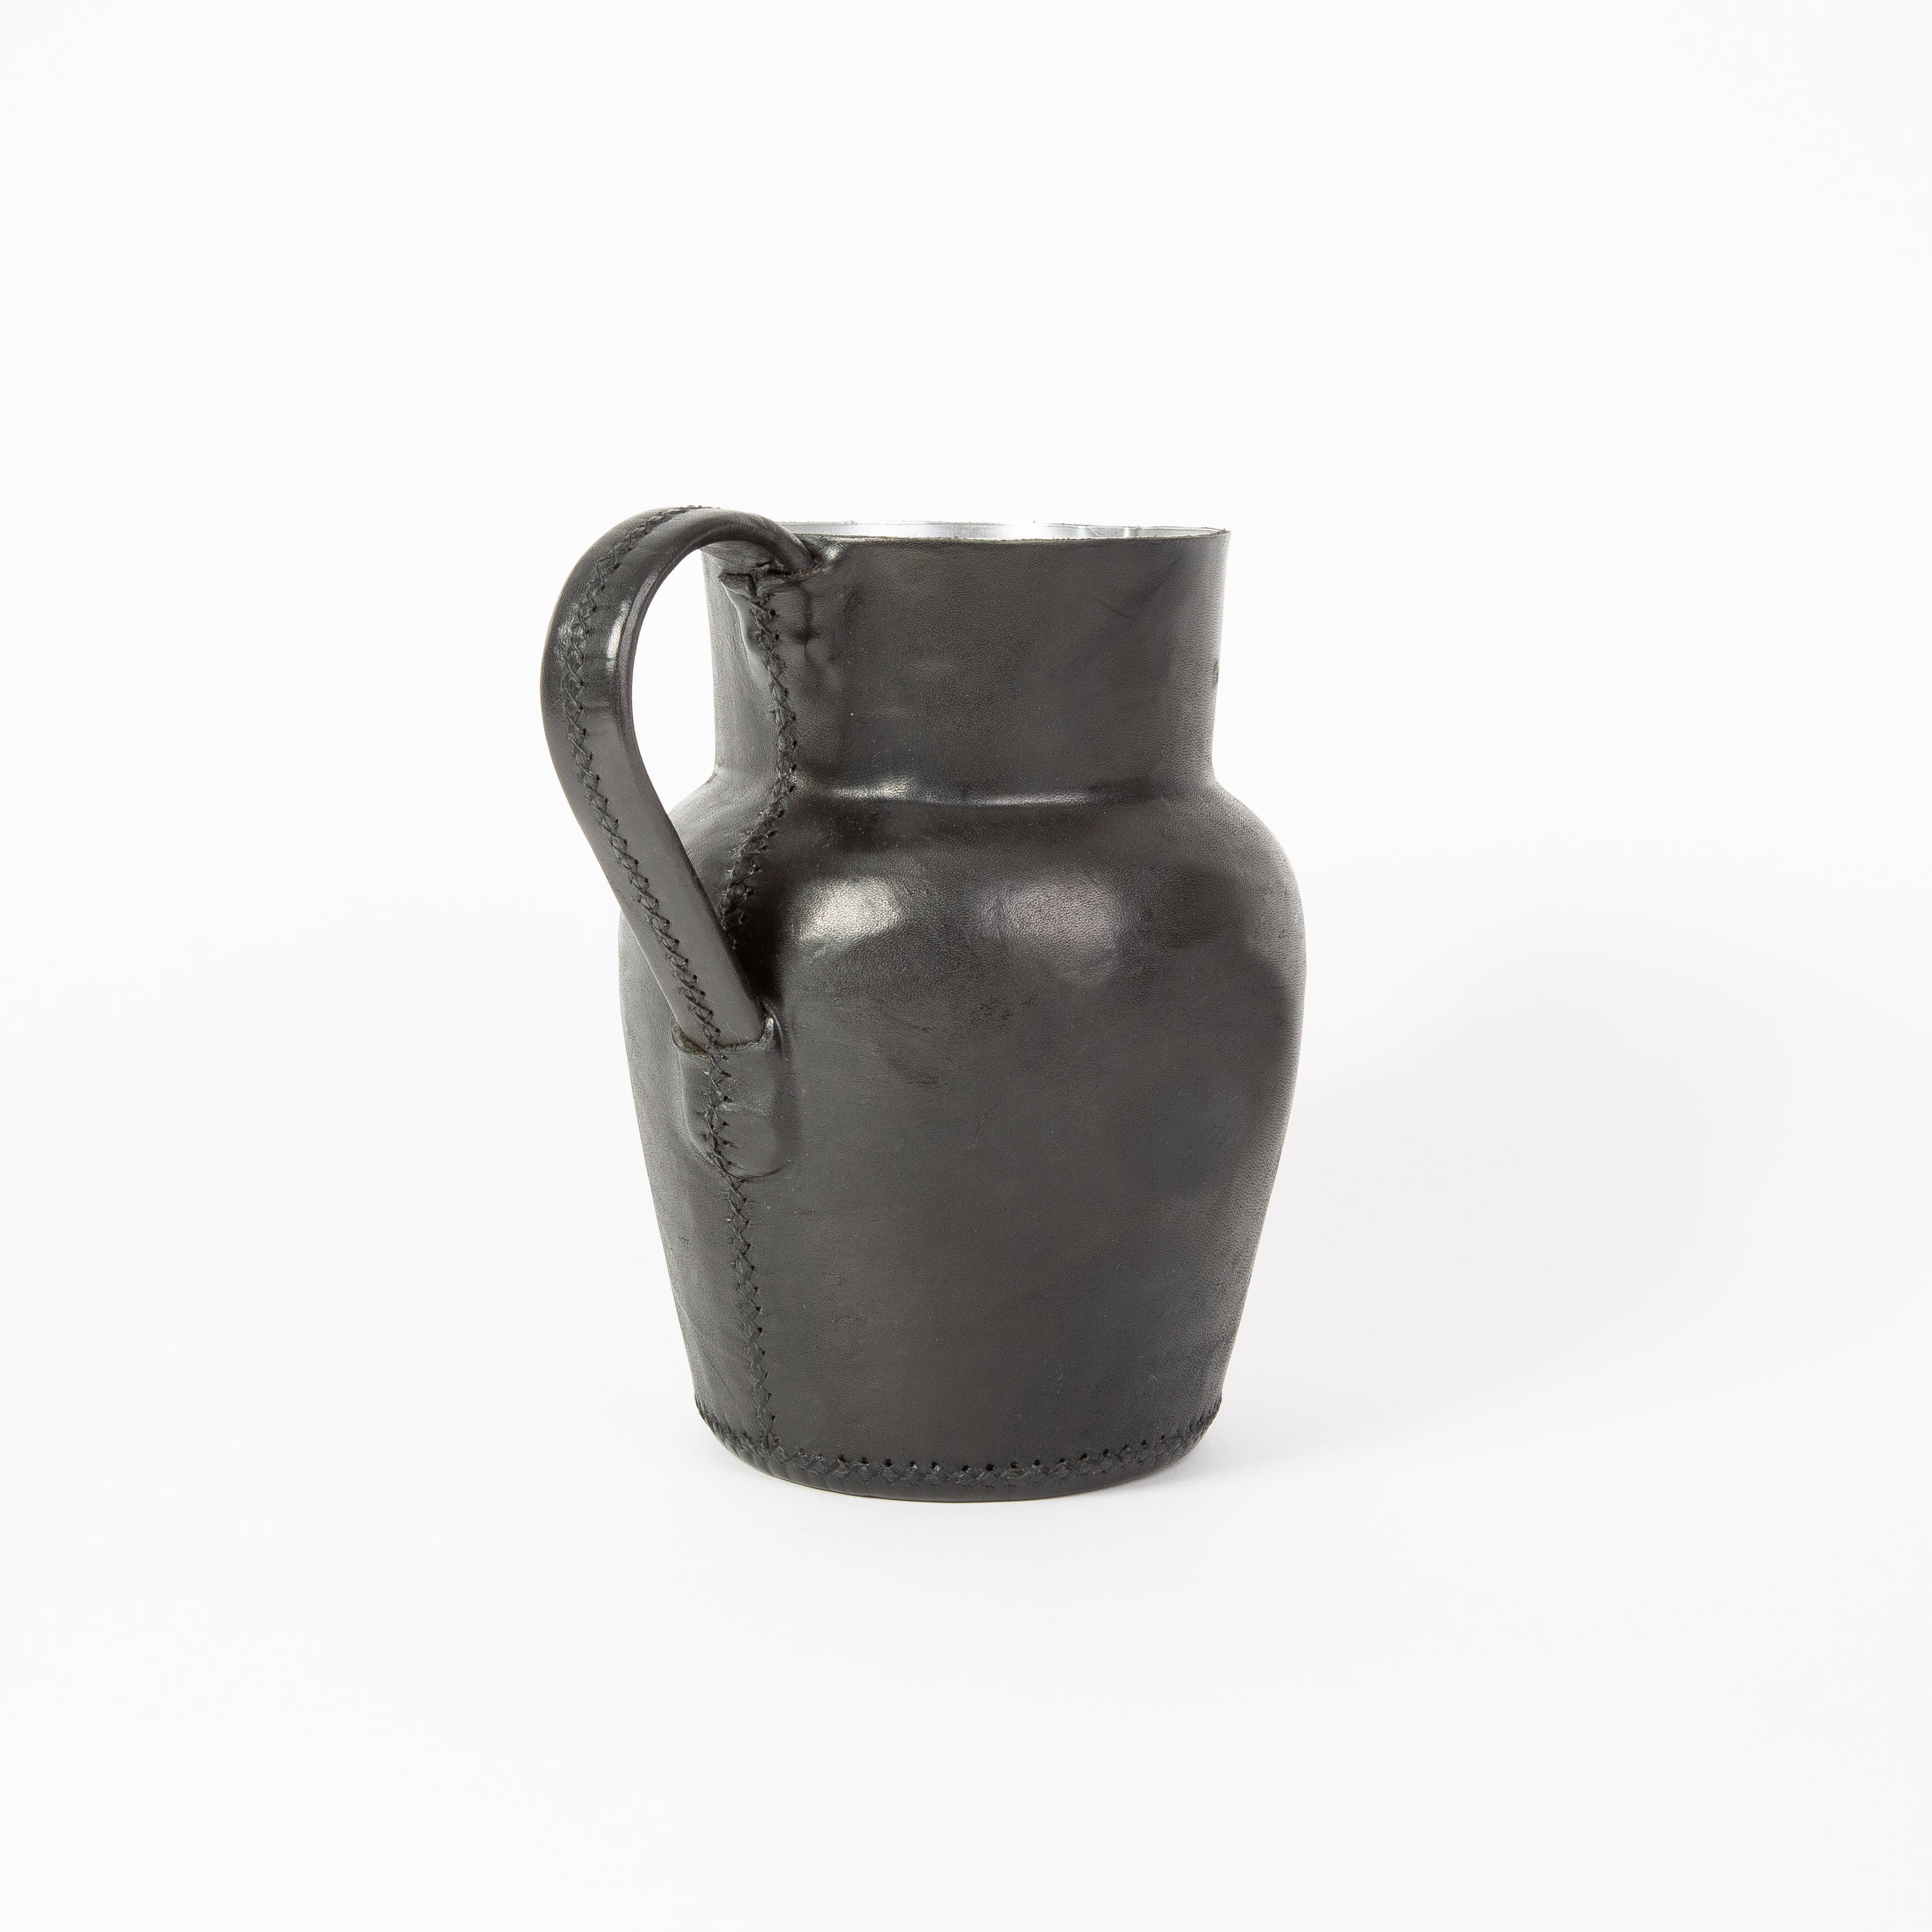 Black Leather Carafe | Leather Pitcher | Leather Vase | Leather Home Goods | Home Goods | Home and Garden | Interior Design | Leather Tablewares | Leather Barwares | Leather Accessories | Bati Leather Goods